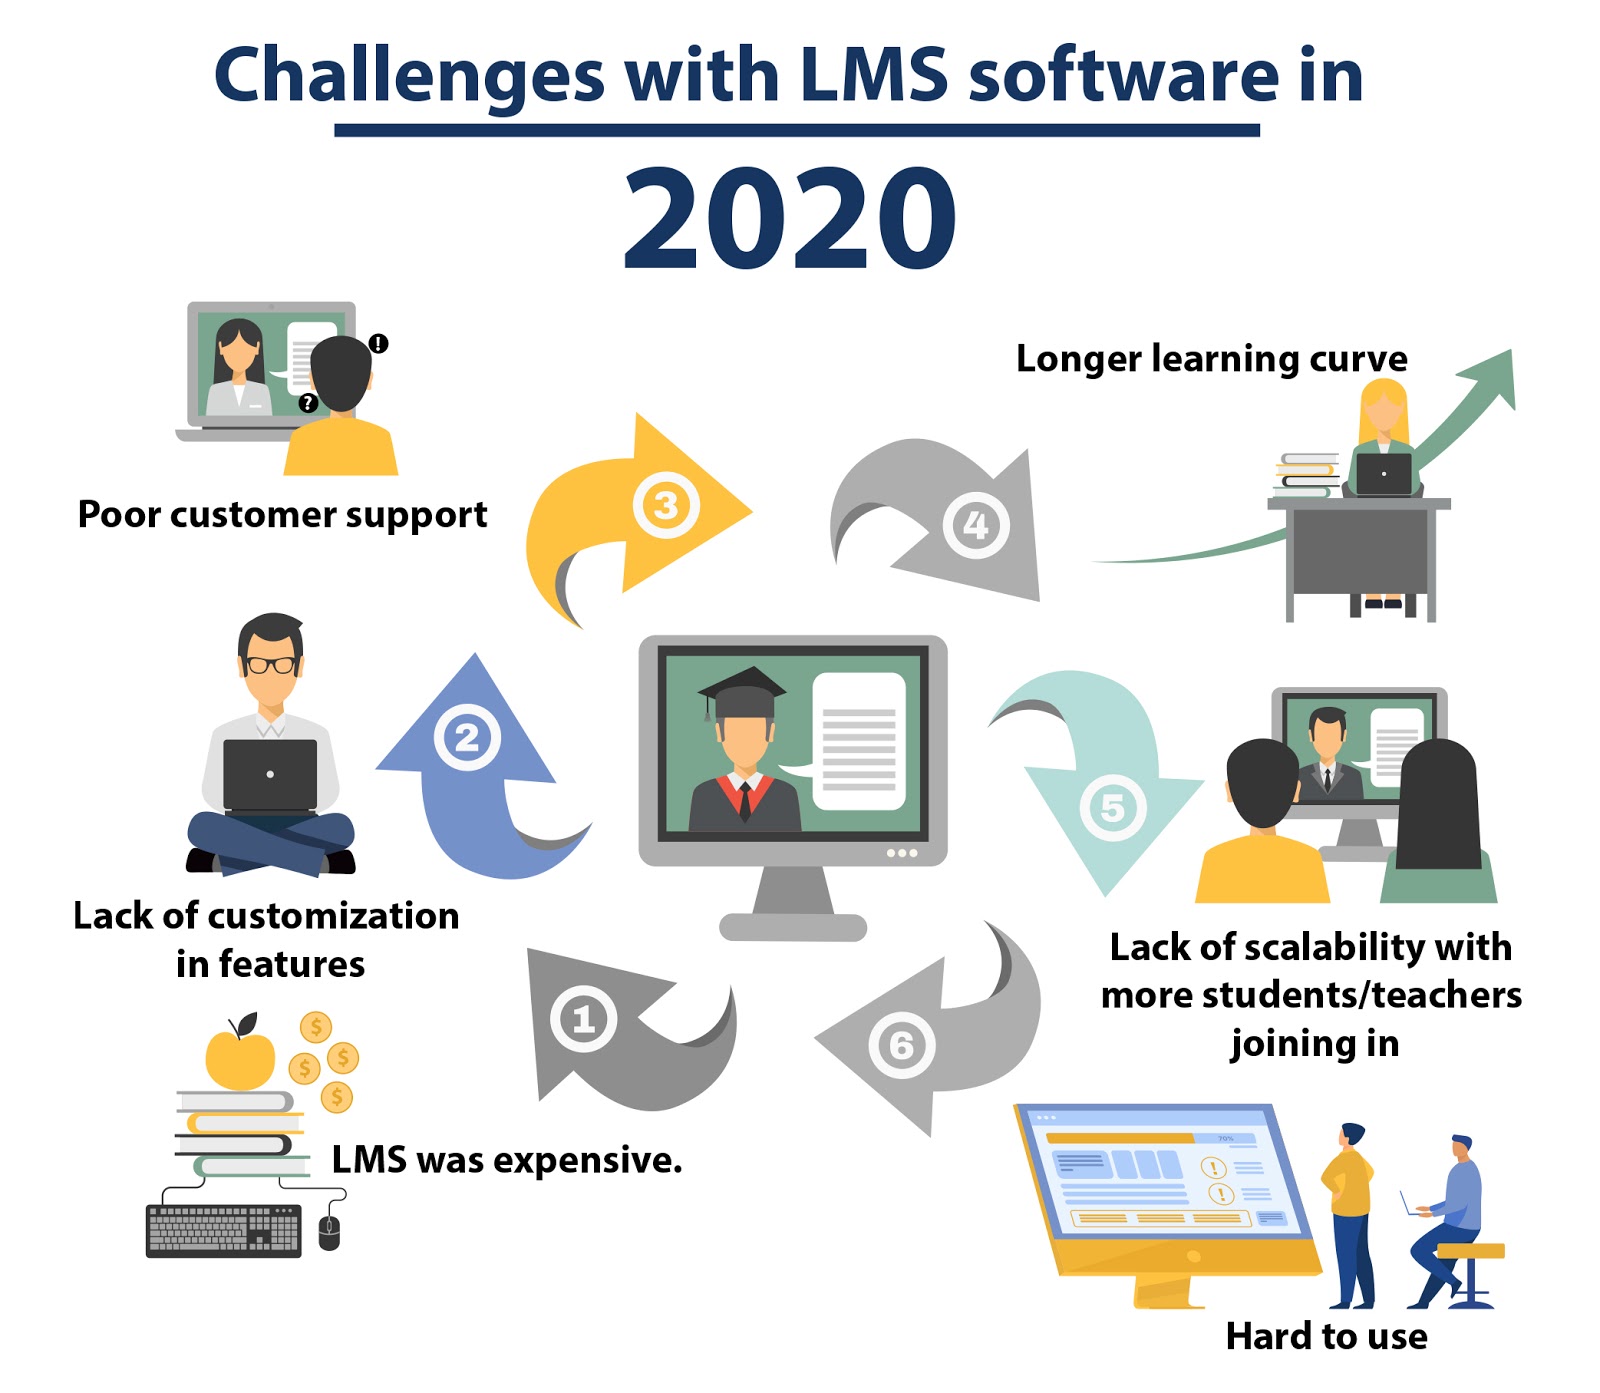 Challenges with LMS software in 2020